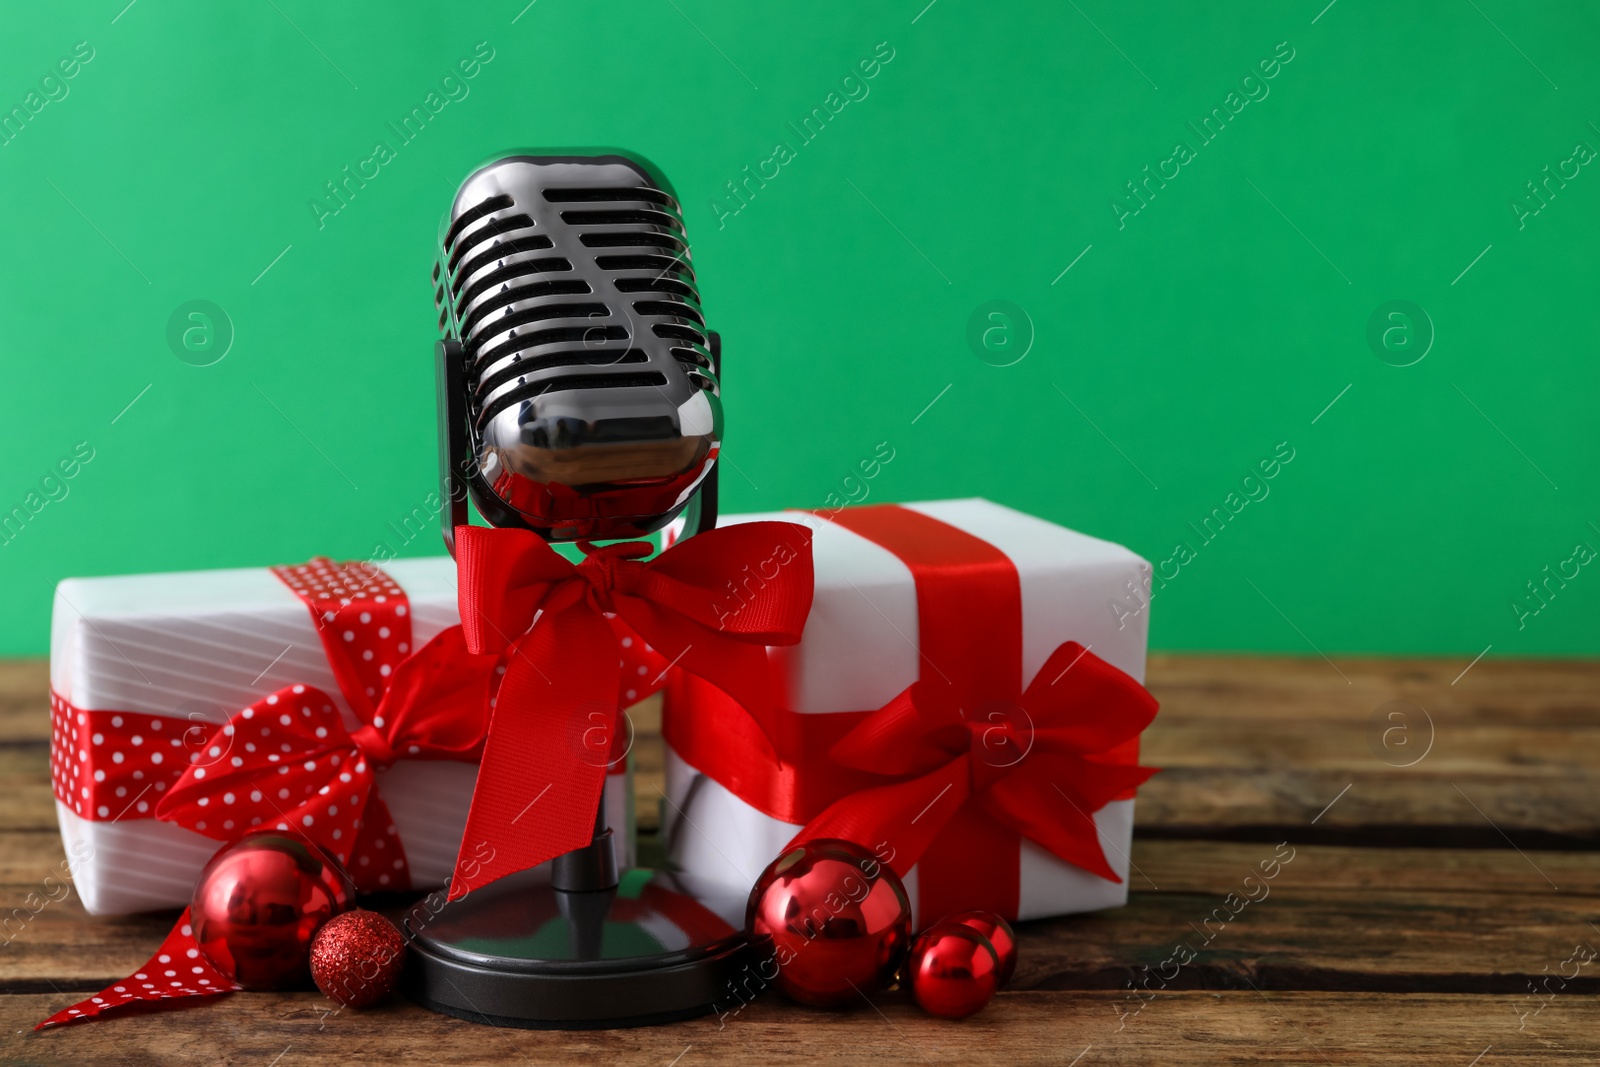 Photo of Retro microphone with red bow, gift boxes and festive decor on wooden table against green background, space for text. Christmas music